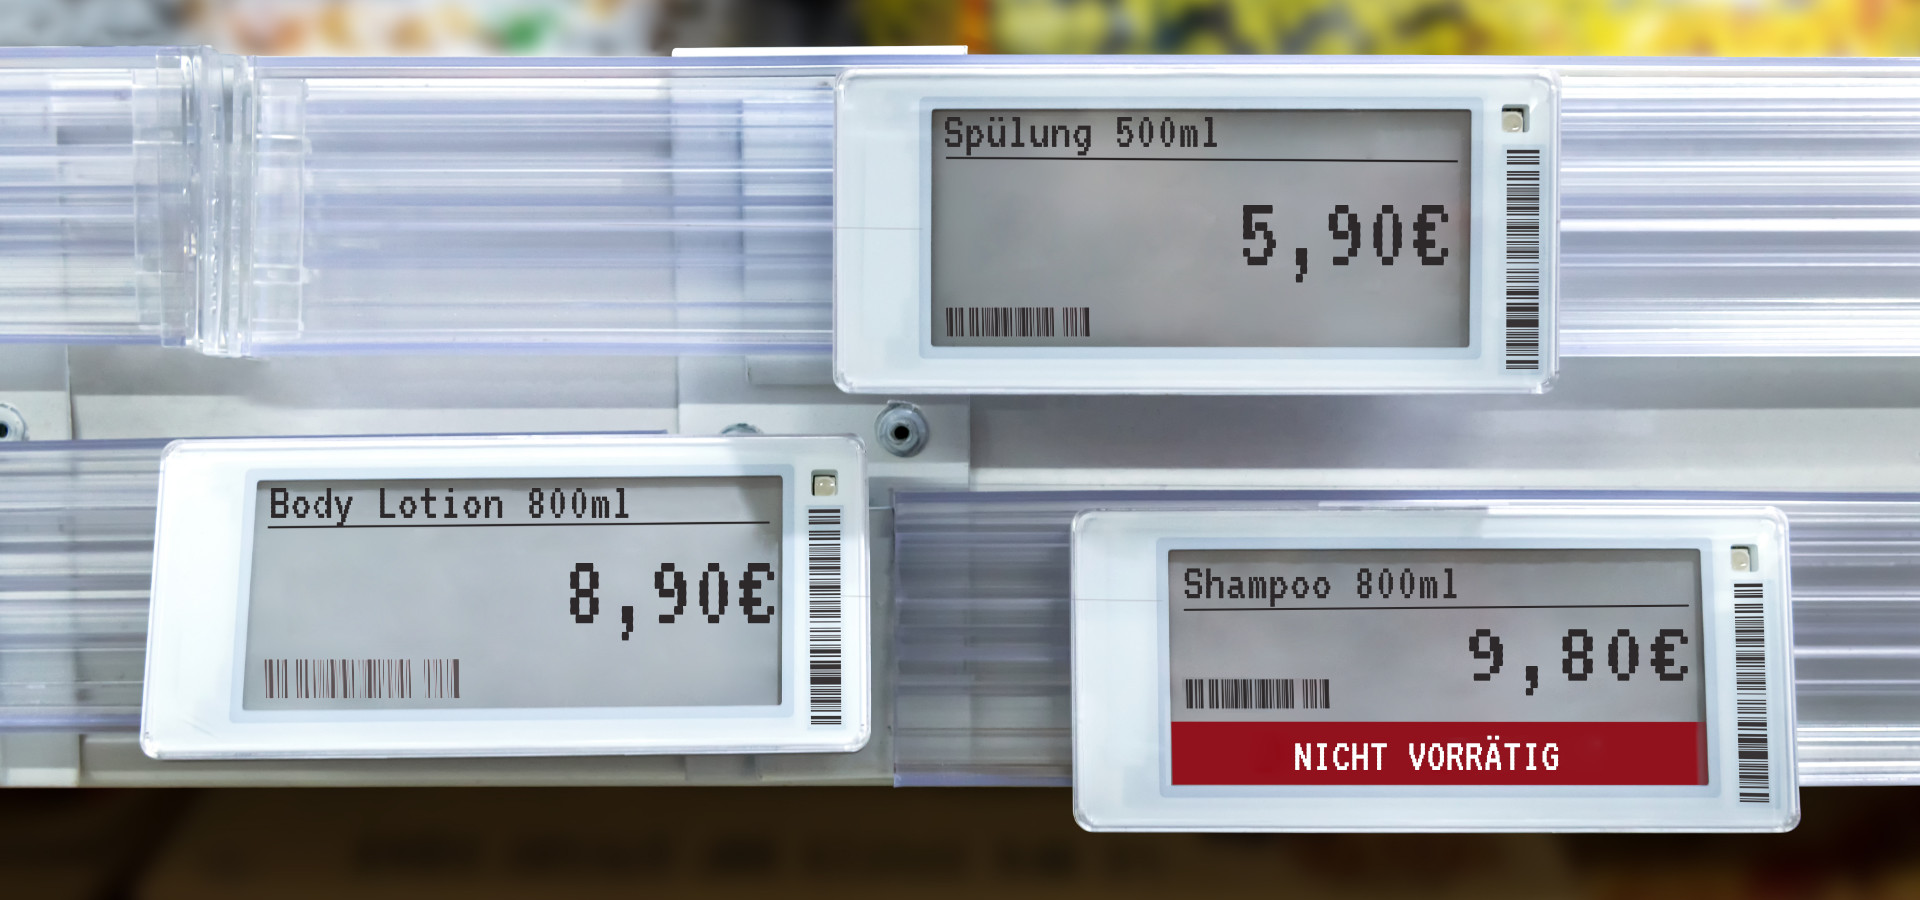 NFC displays with different prices at retail